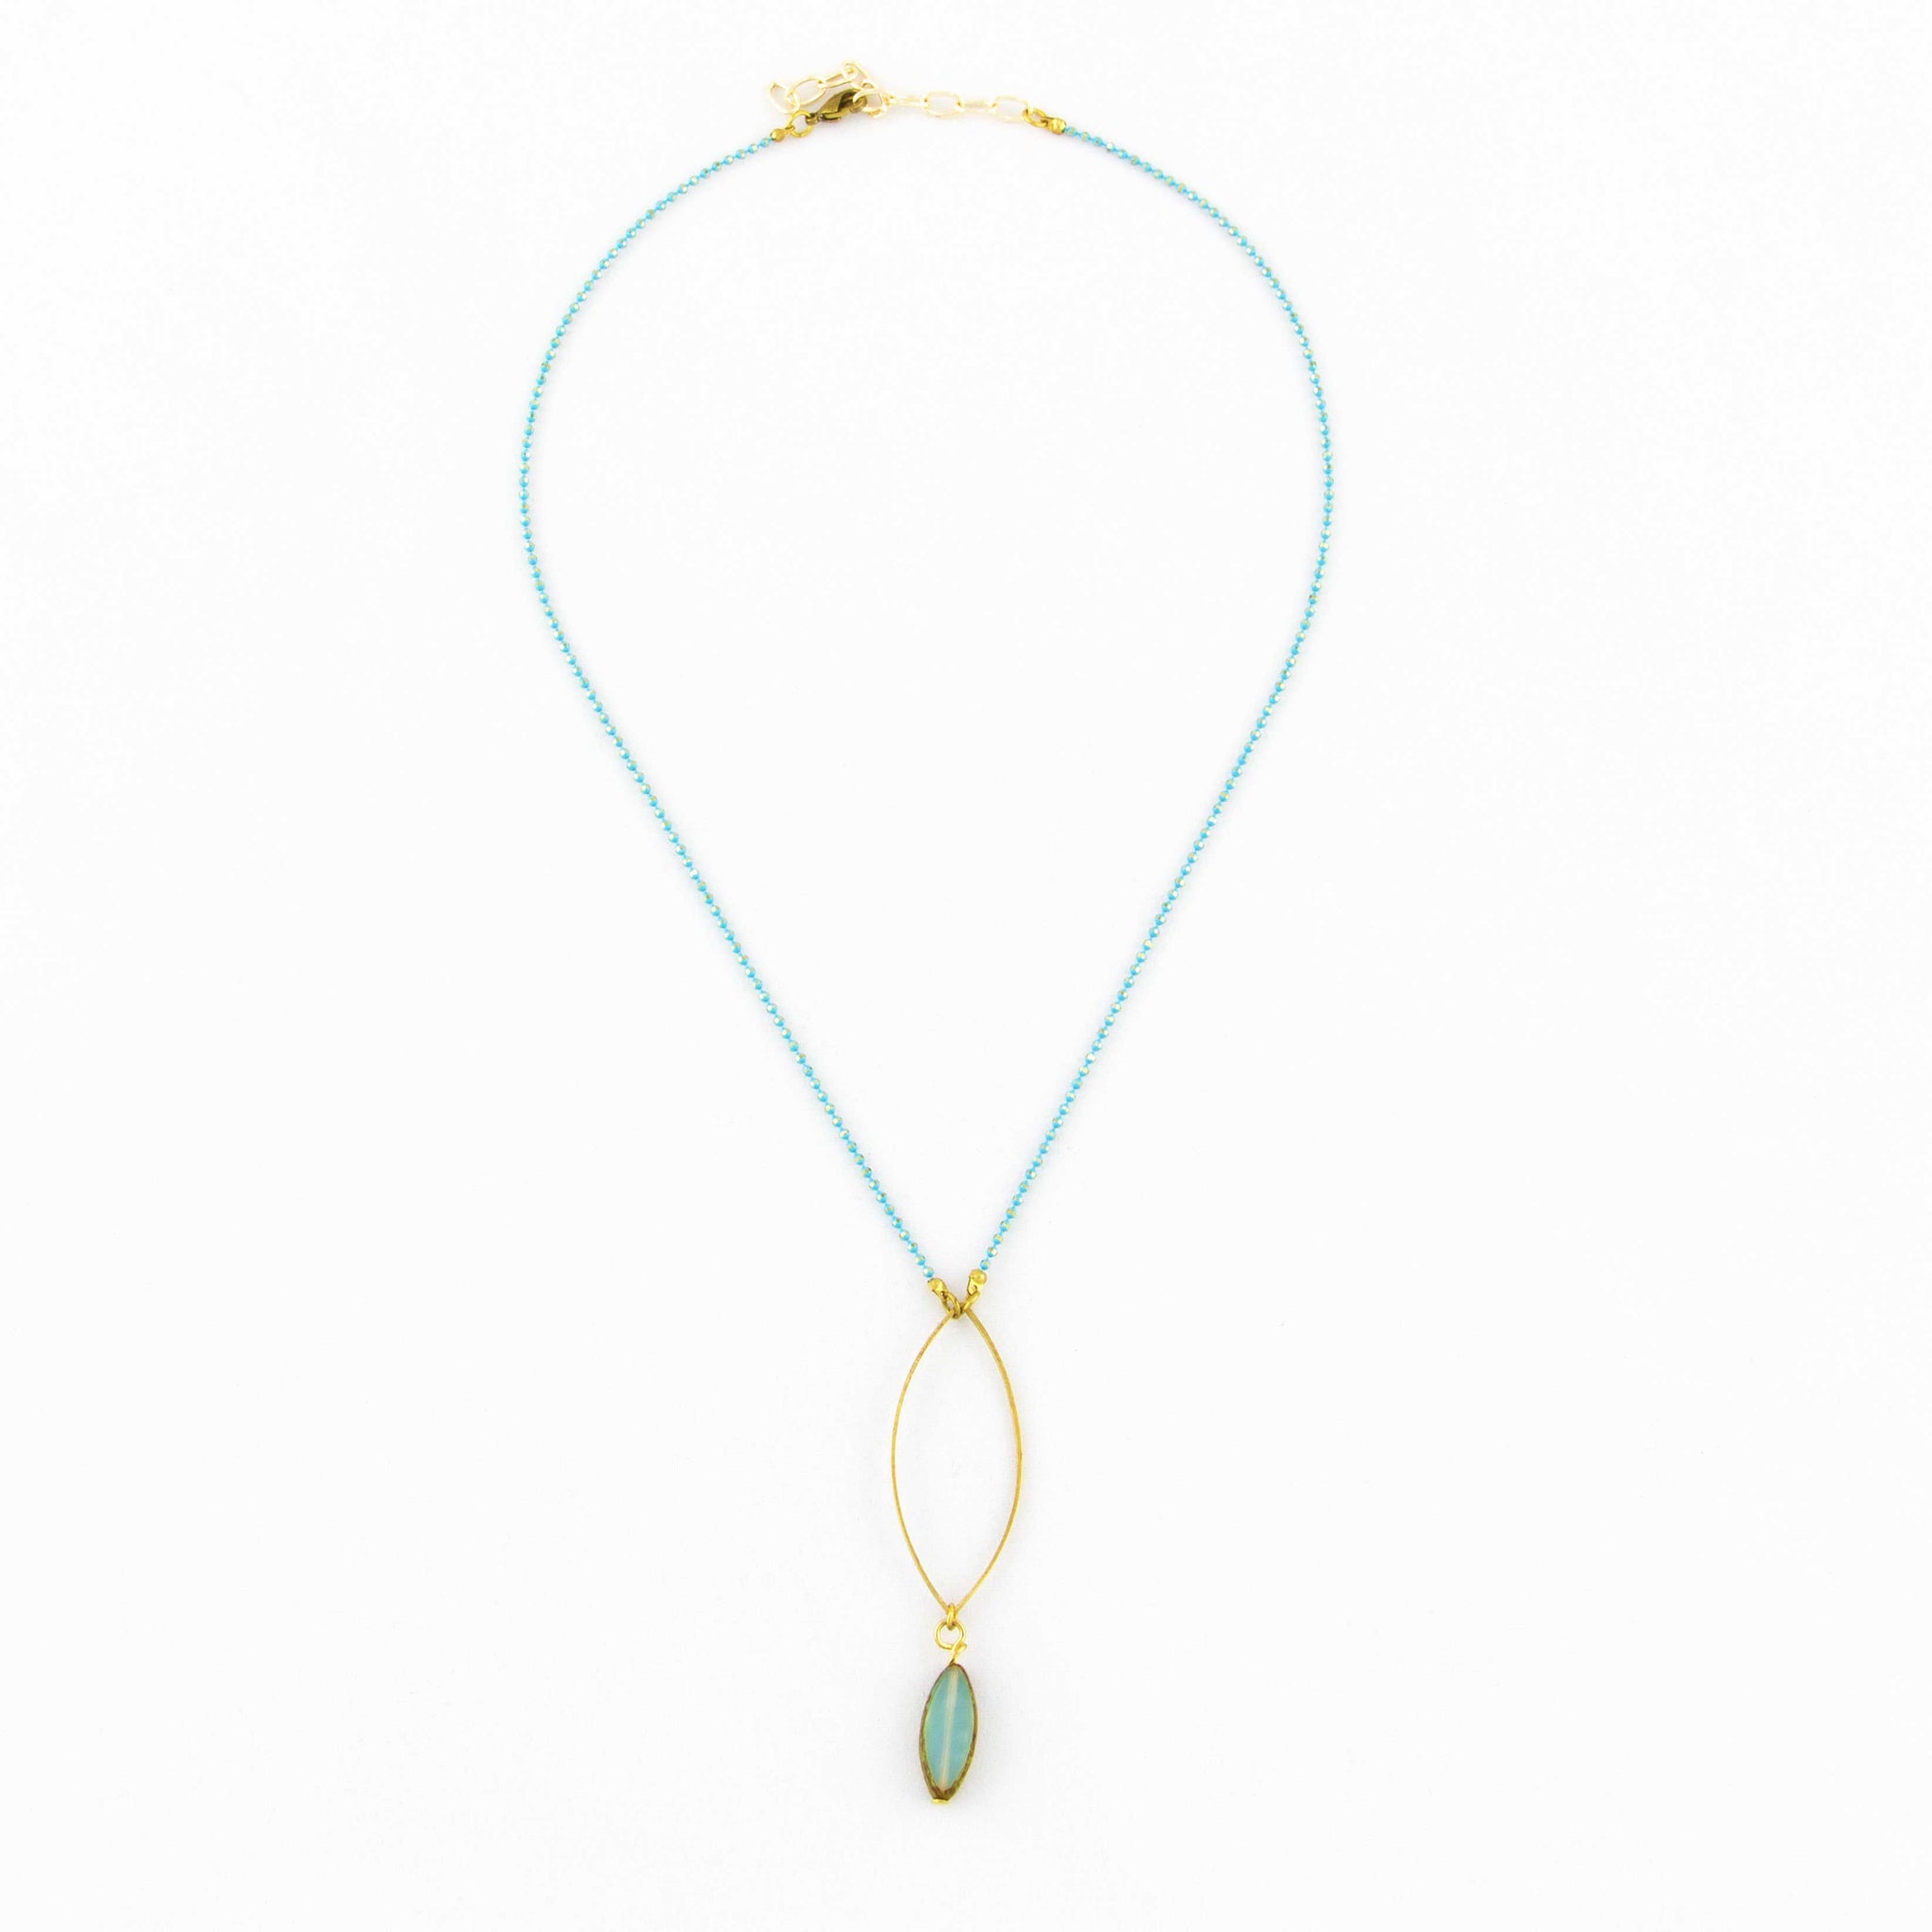 Lyra Necklace: Turquoise Marquise Necklace